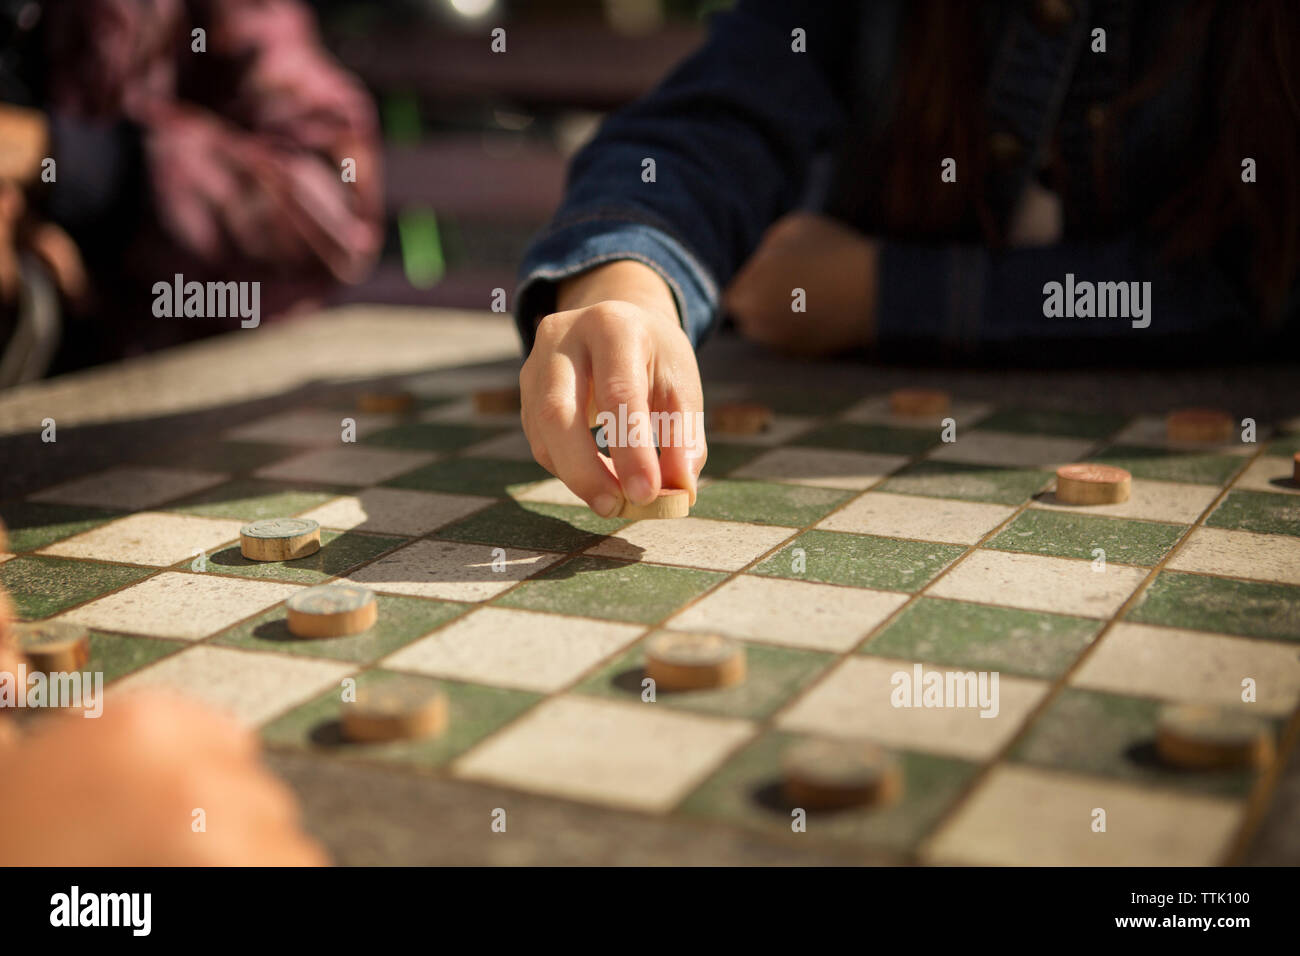 Portrait of girls playing checkers game Banque D'Images